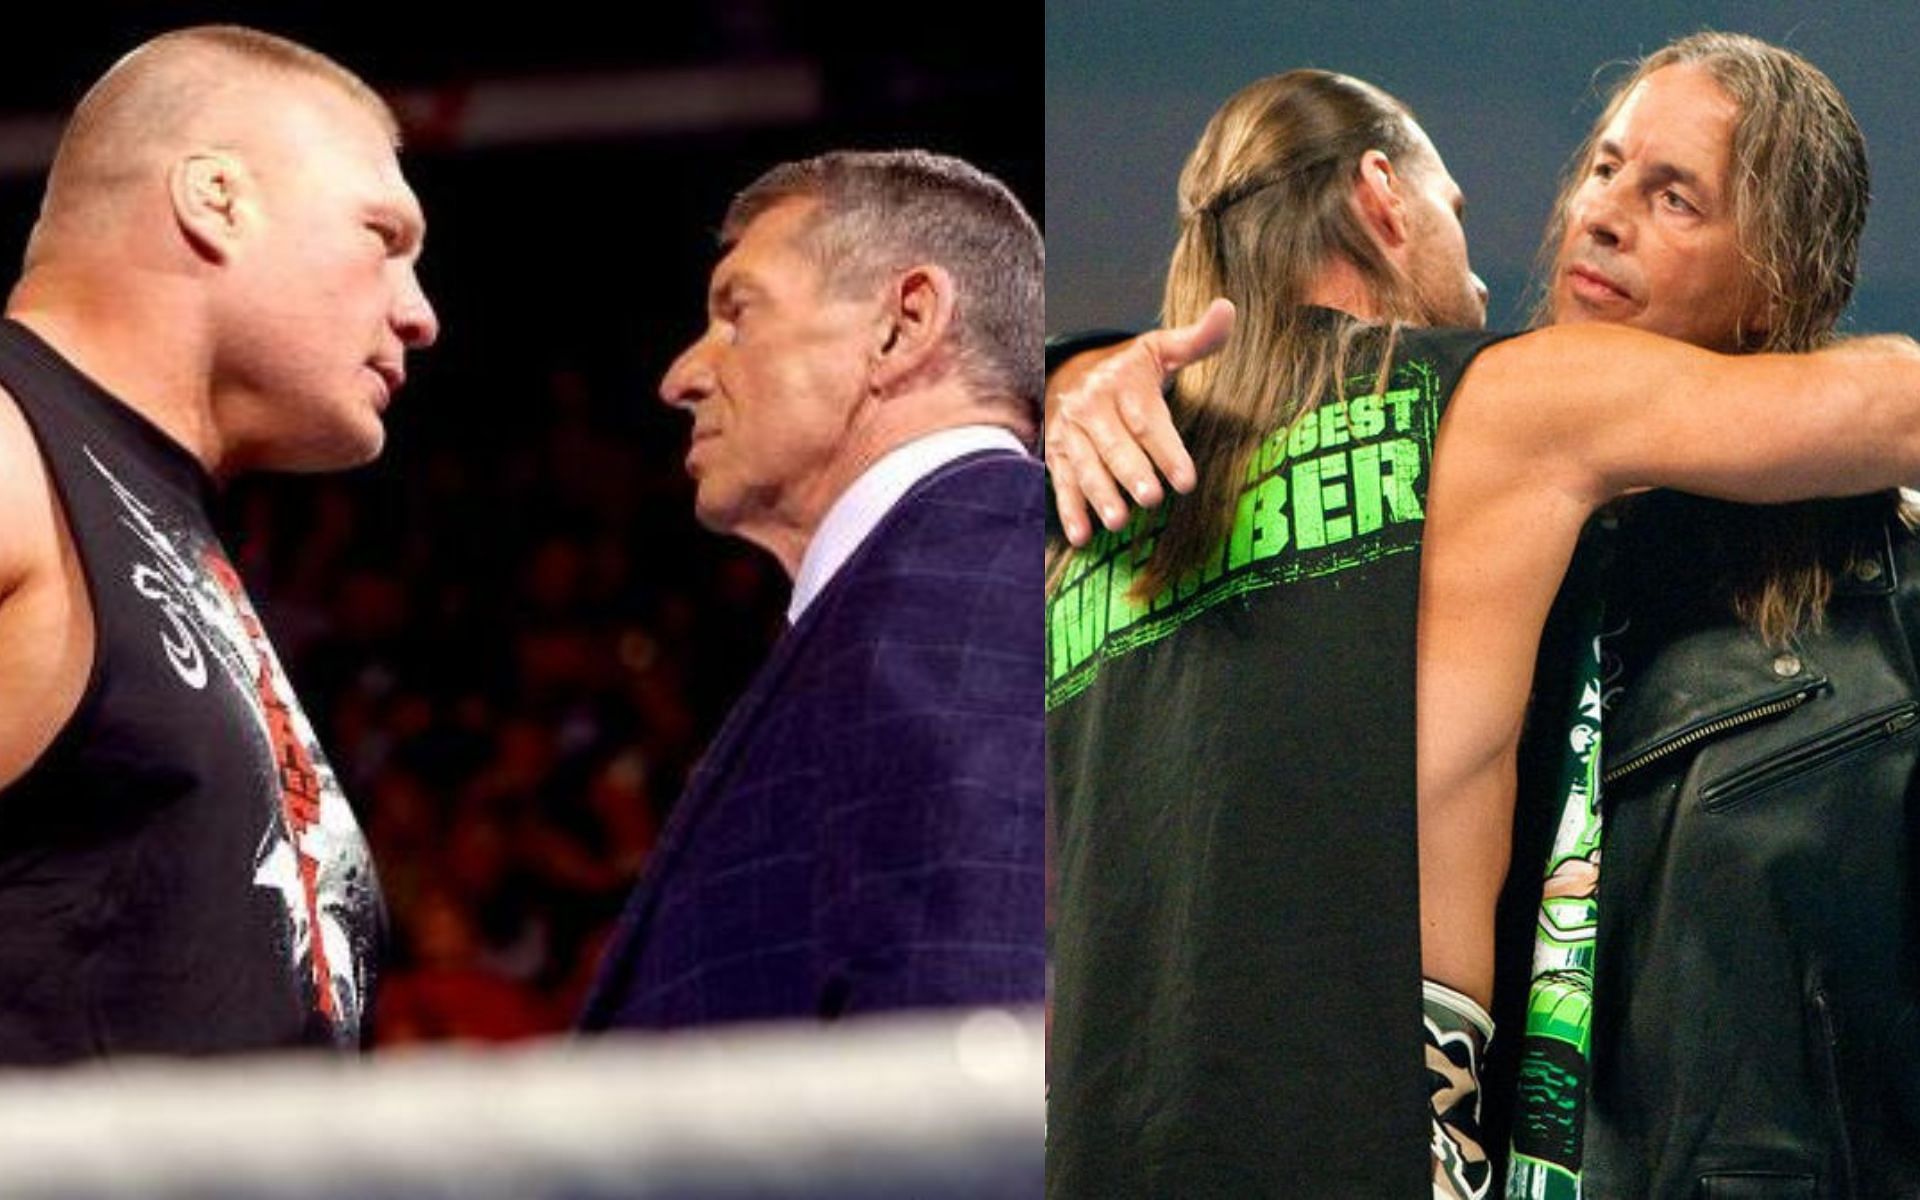 Do you remember why these superstars left WWE?